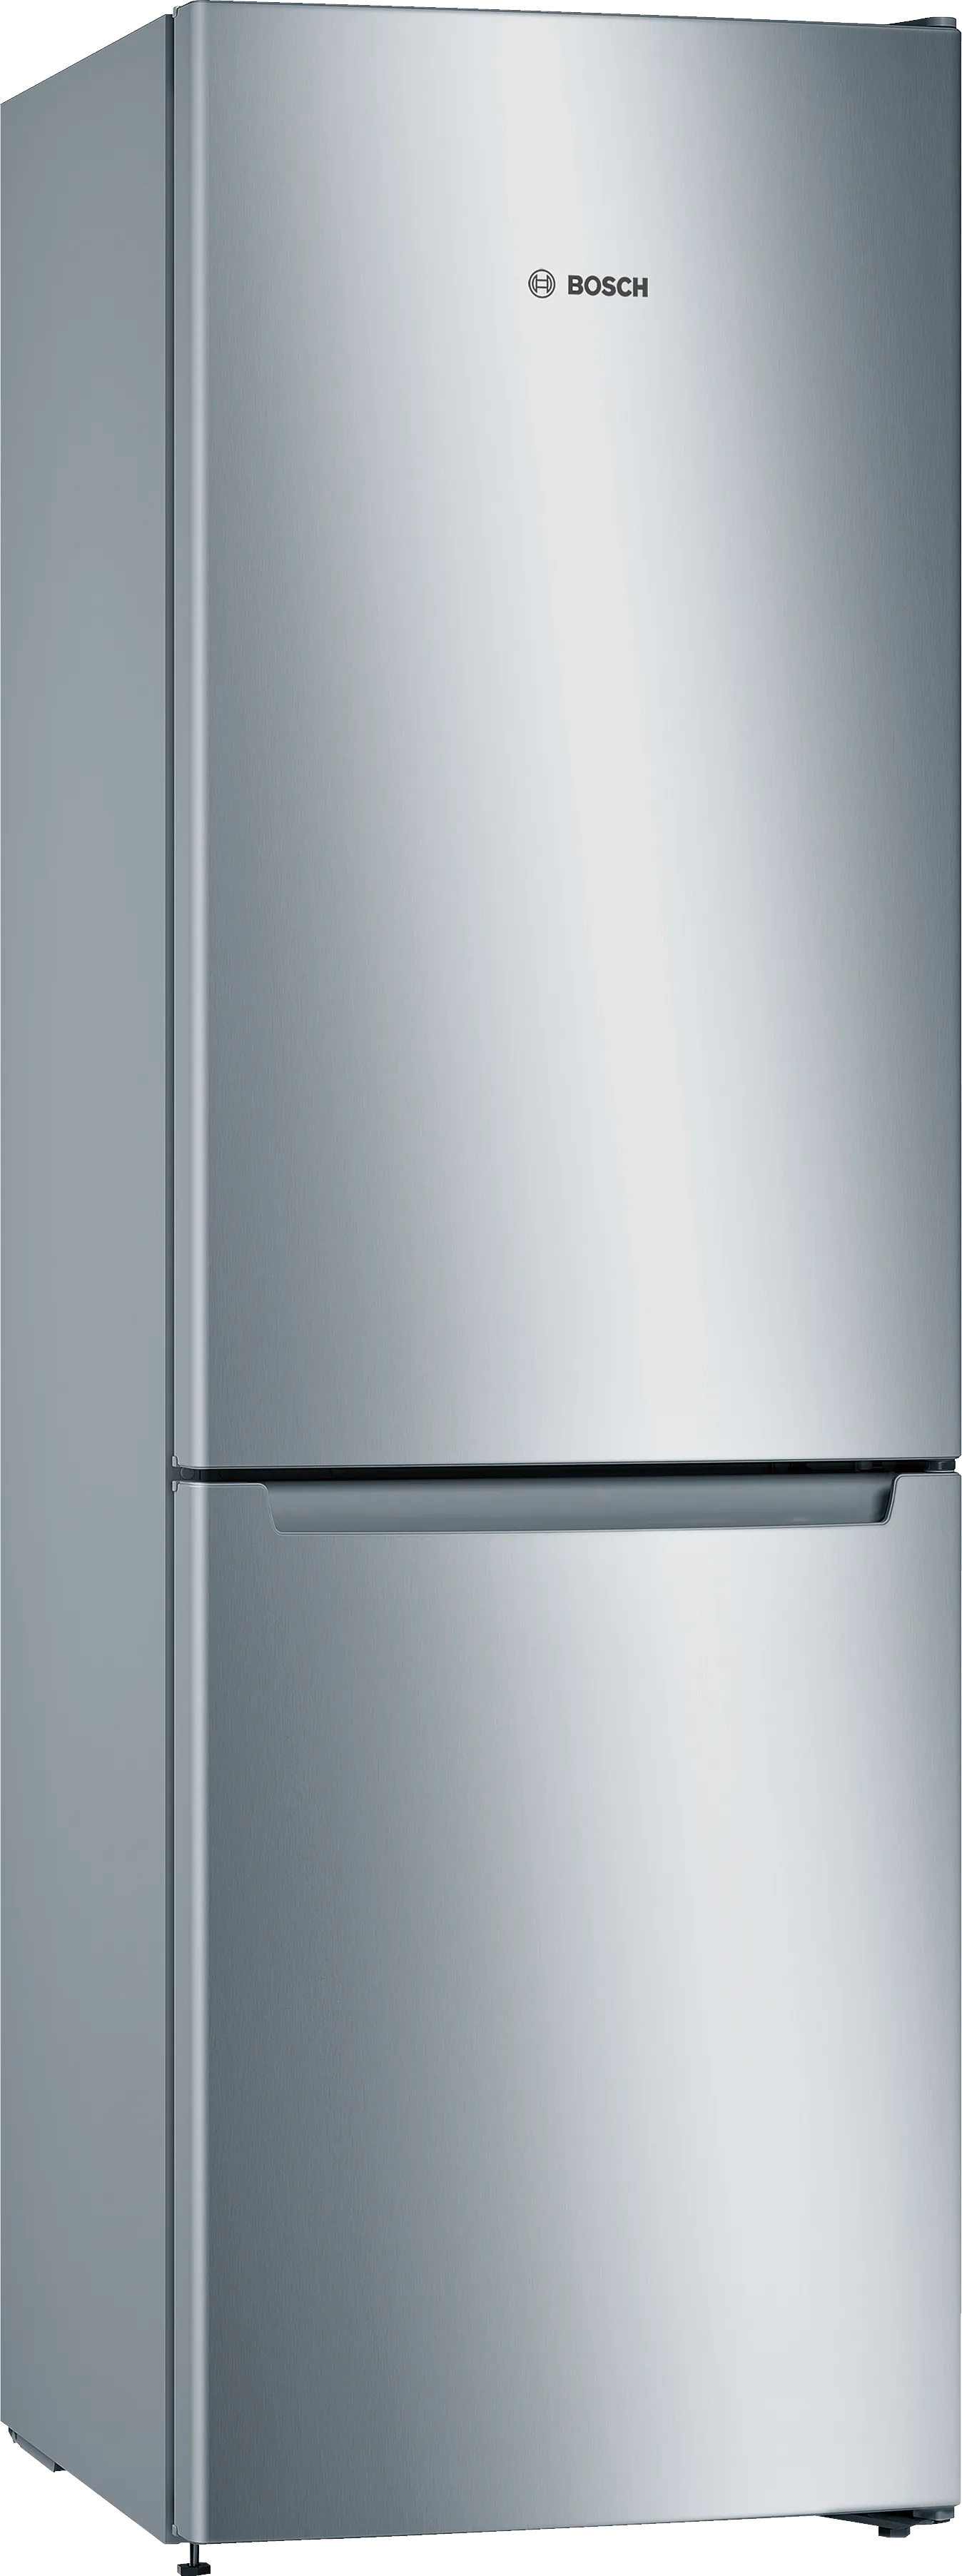 Series 2 free-standing fridge-freezer with freezer at bottom 186 x 60 cm Stainless steel look 